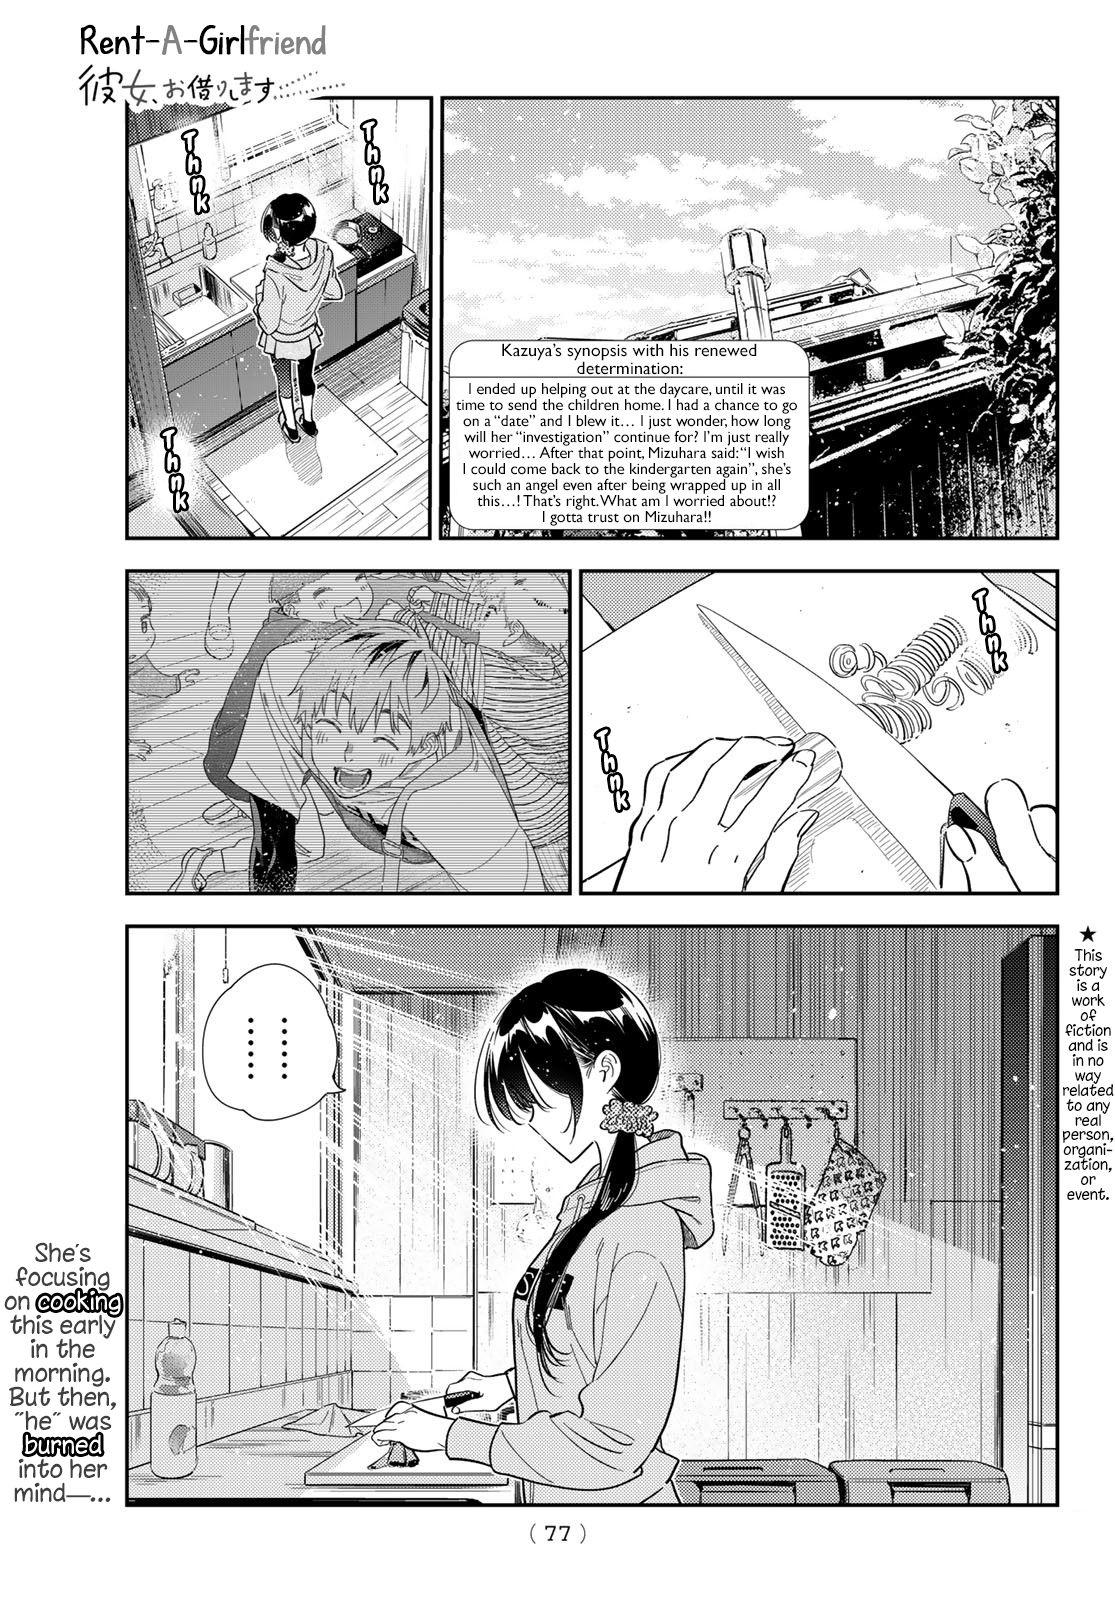 Rent a Girlfriend Chapter 306 by E Scan